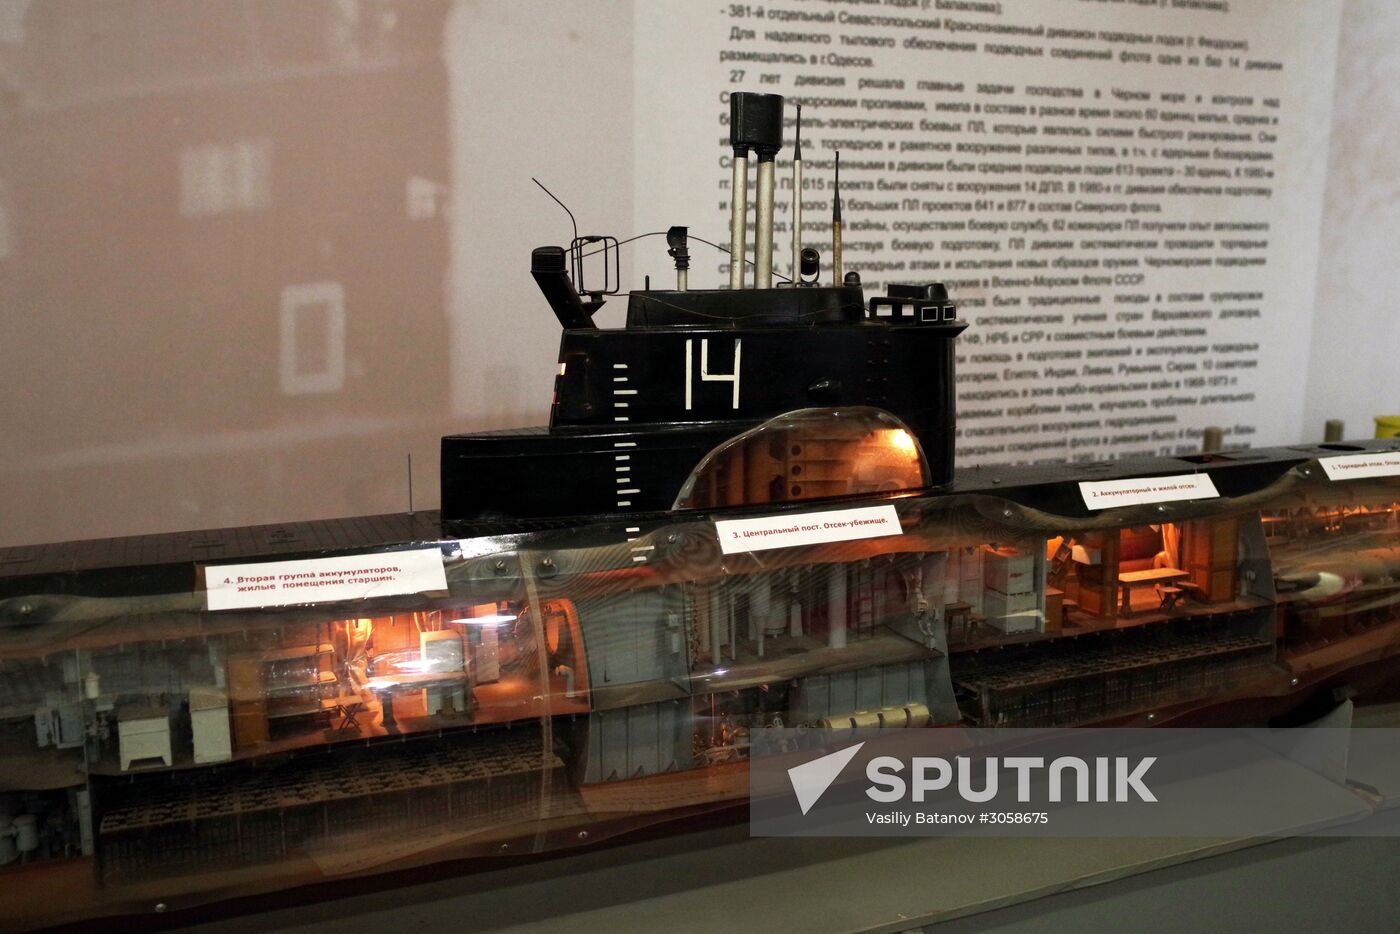 Opening of exhibition to mark 50th anniversary of 14th submarine division in Sevastopol